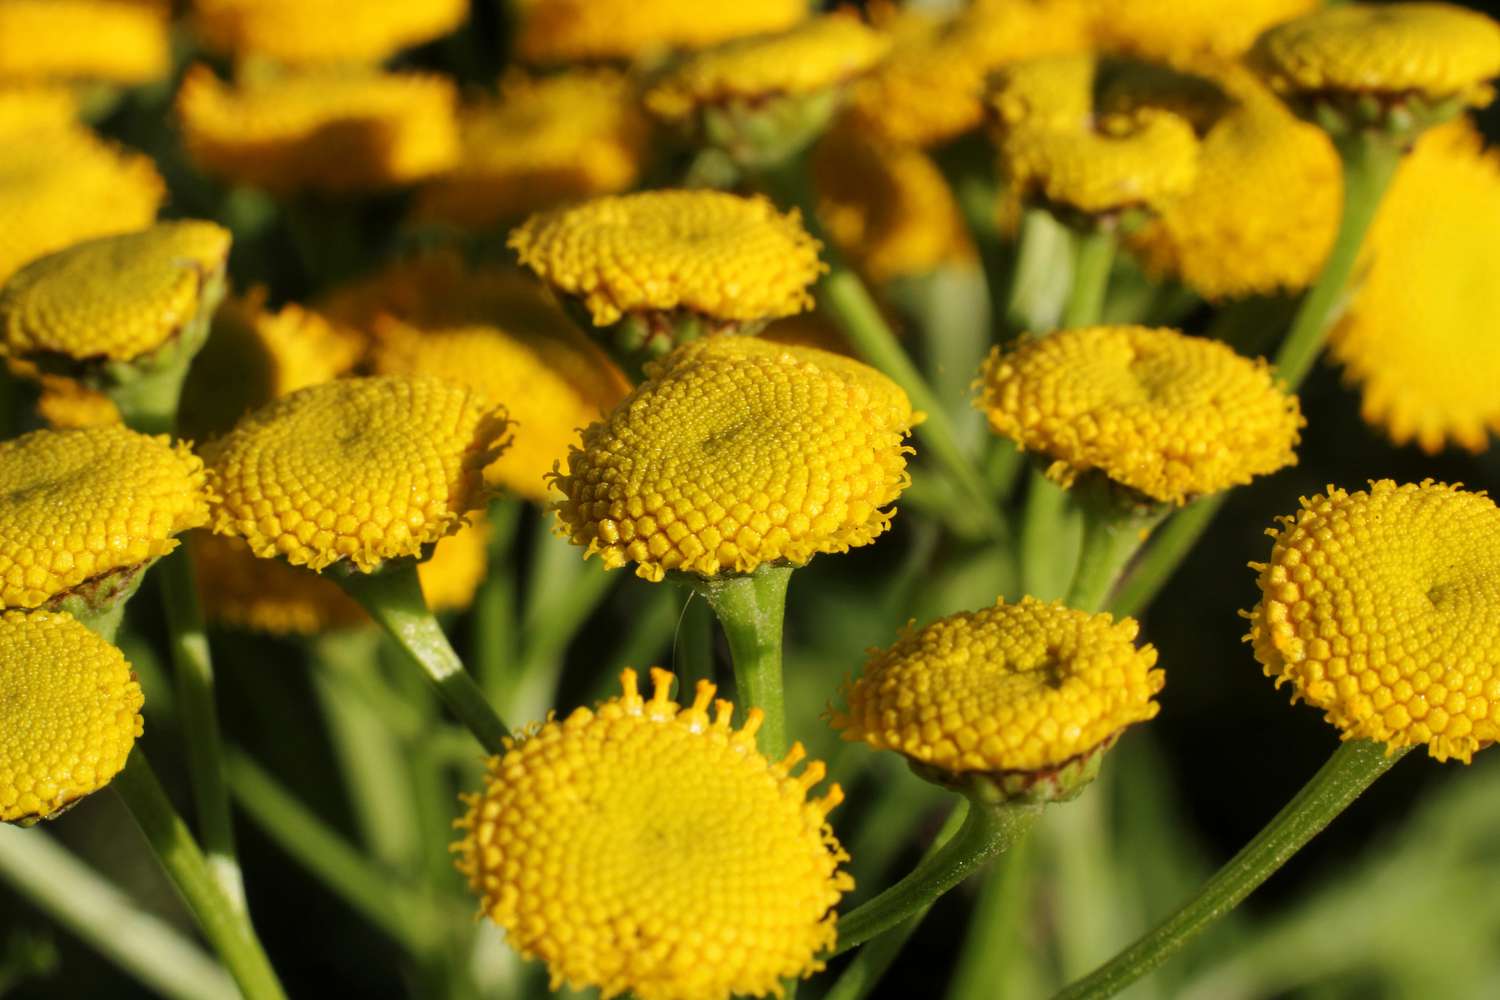 Closeup of flowers of tansy plant.